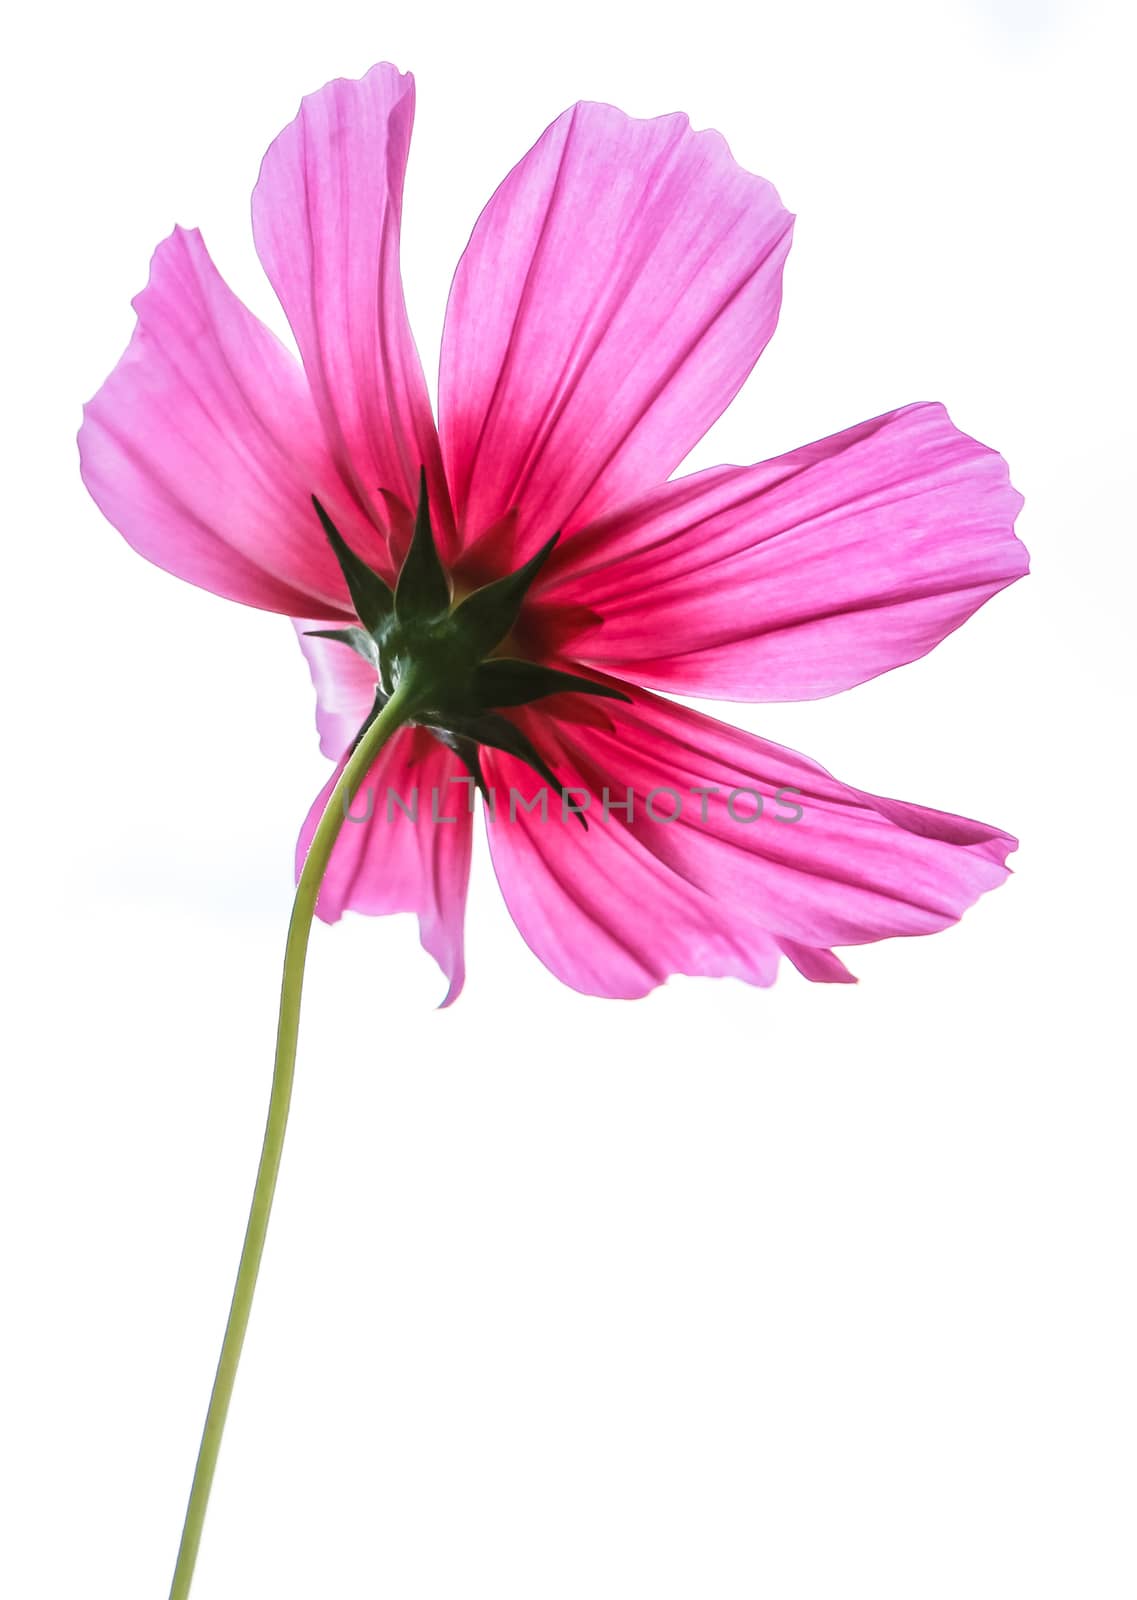 Pink cosmos flower blooming isolated on white background